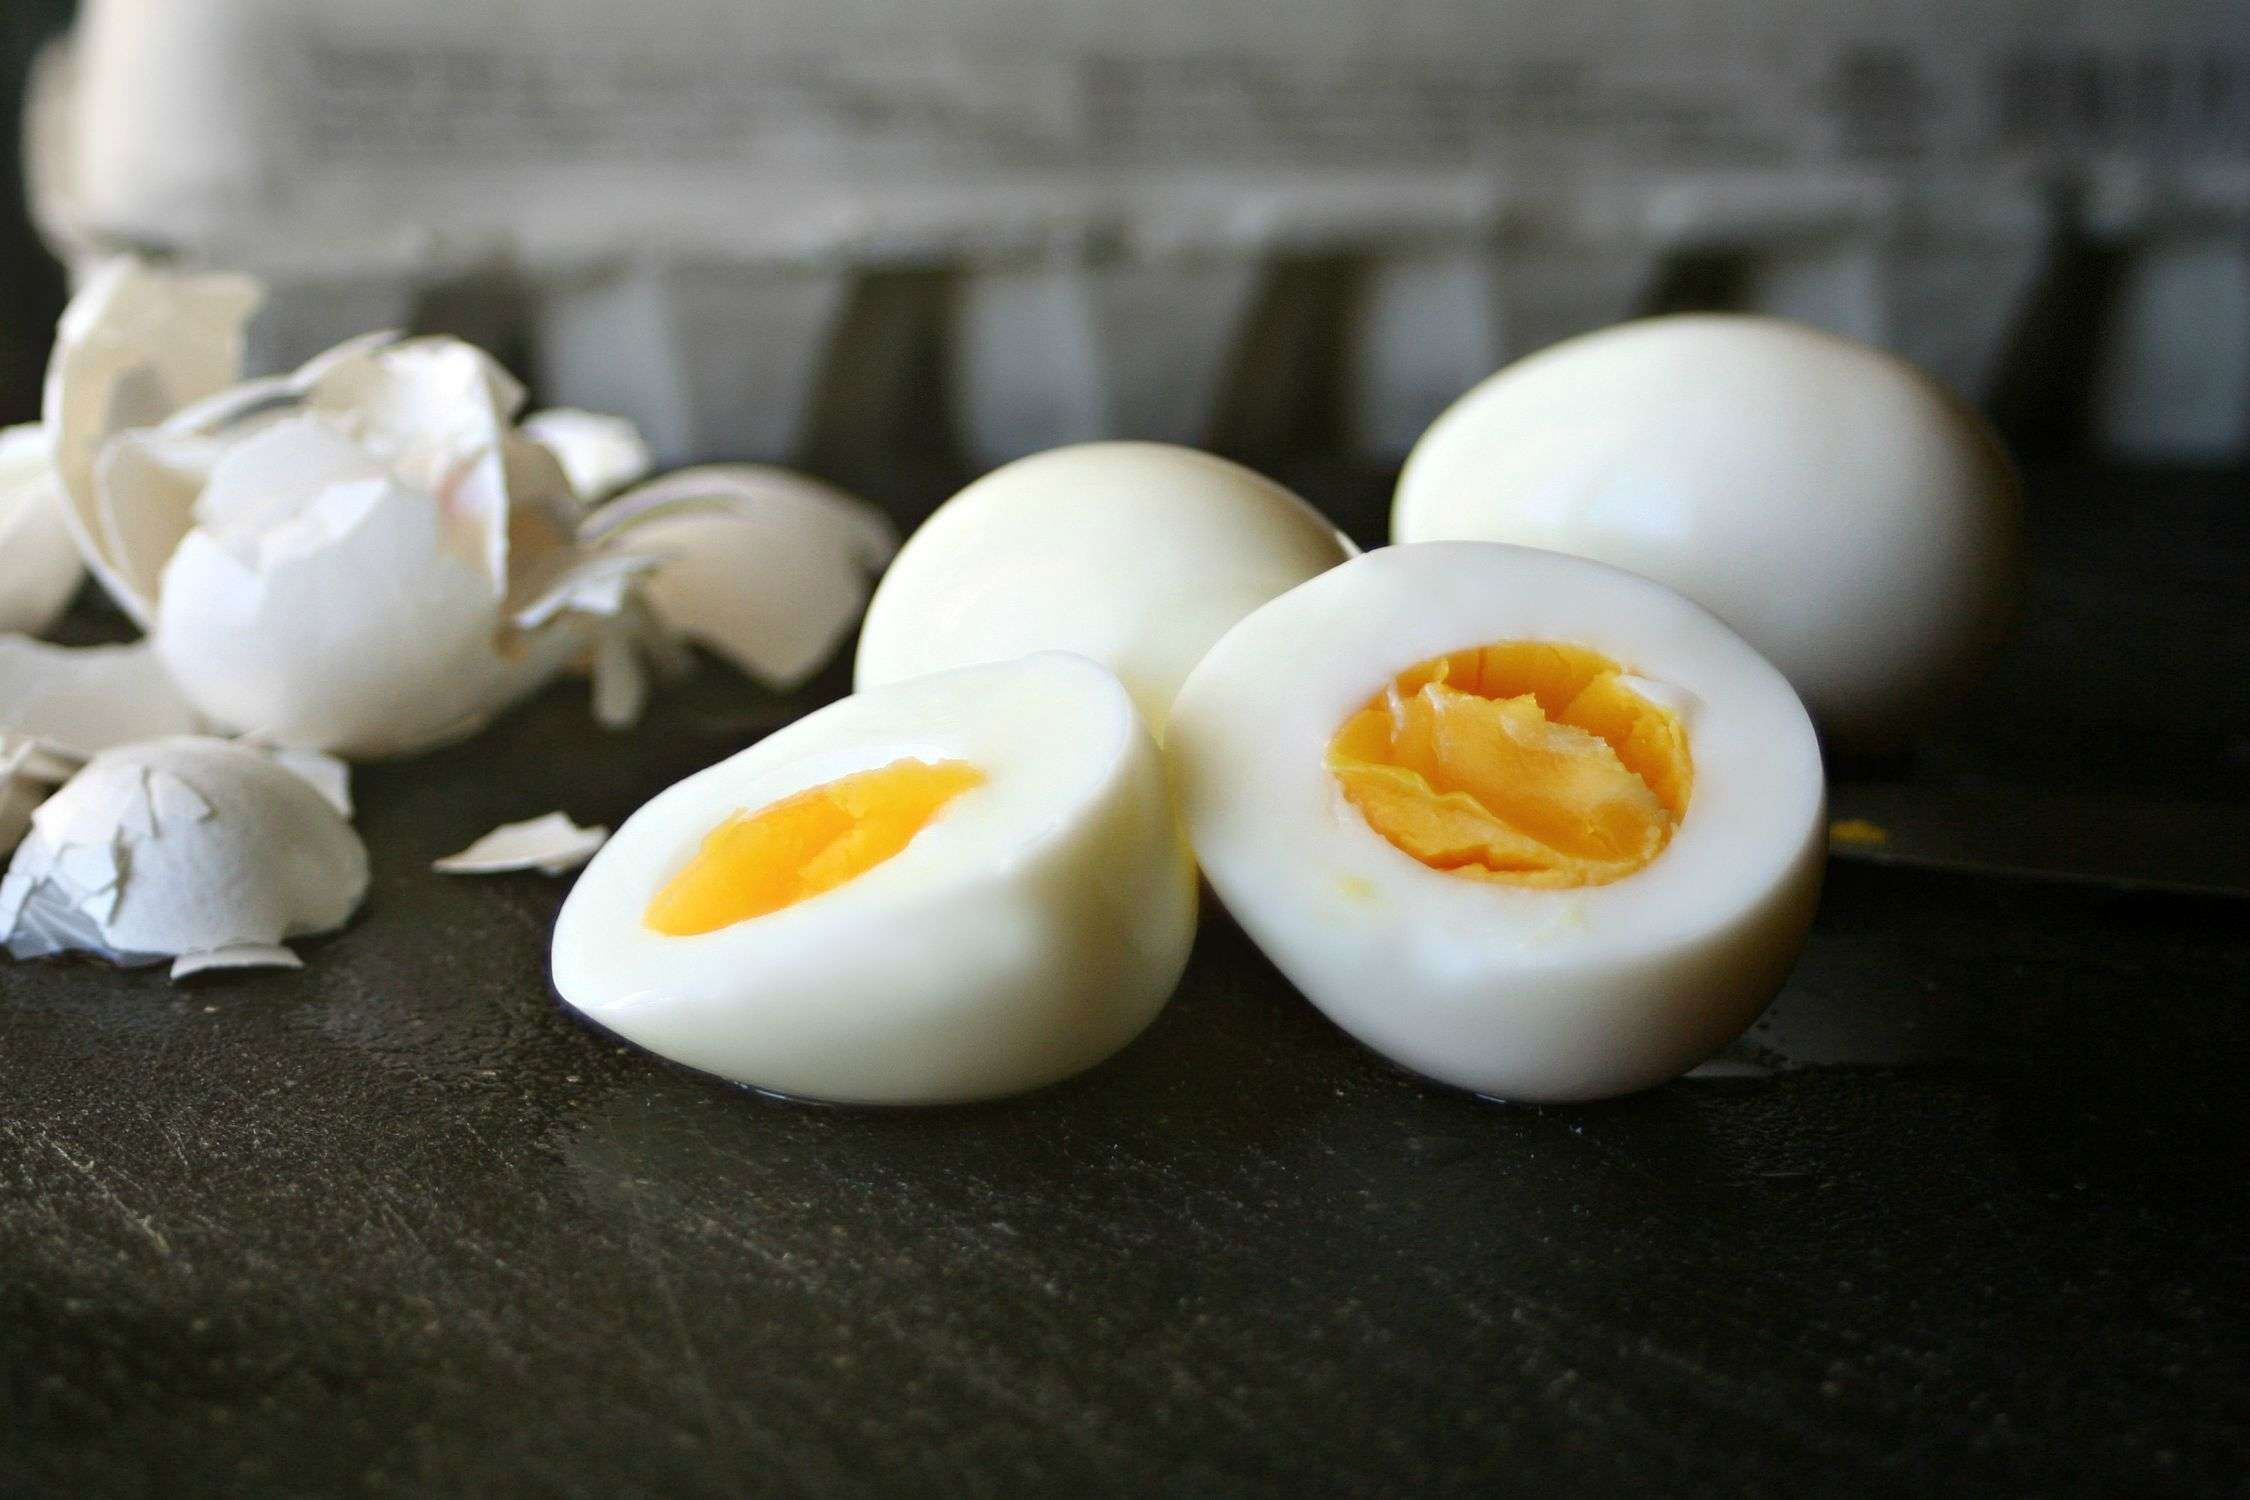 Boiled eggs eliminate these 3 harmful diseases from the root बीमारियों